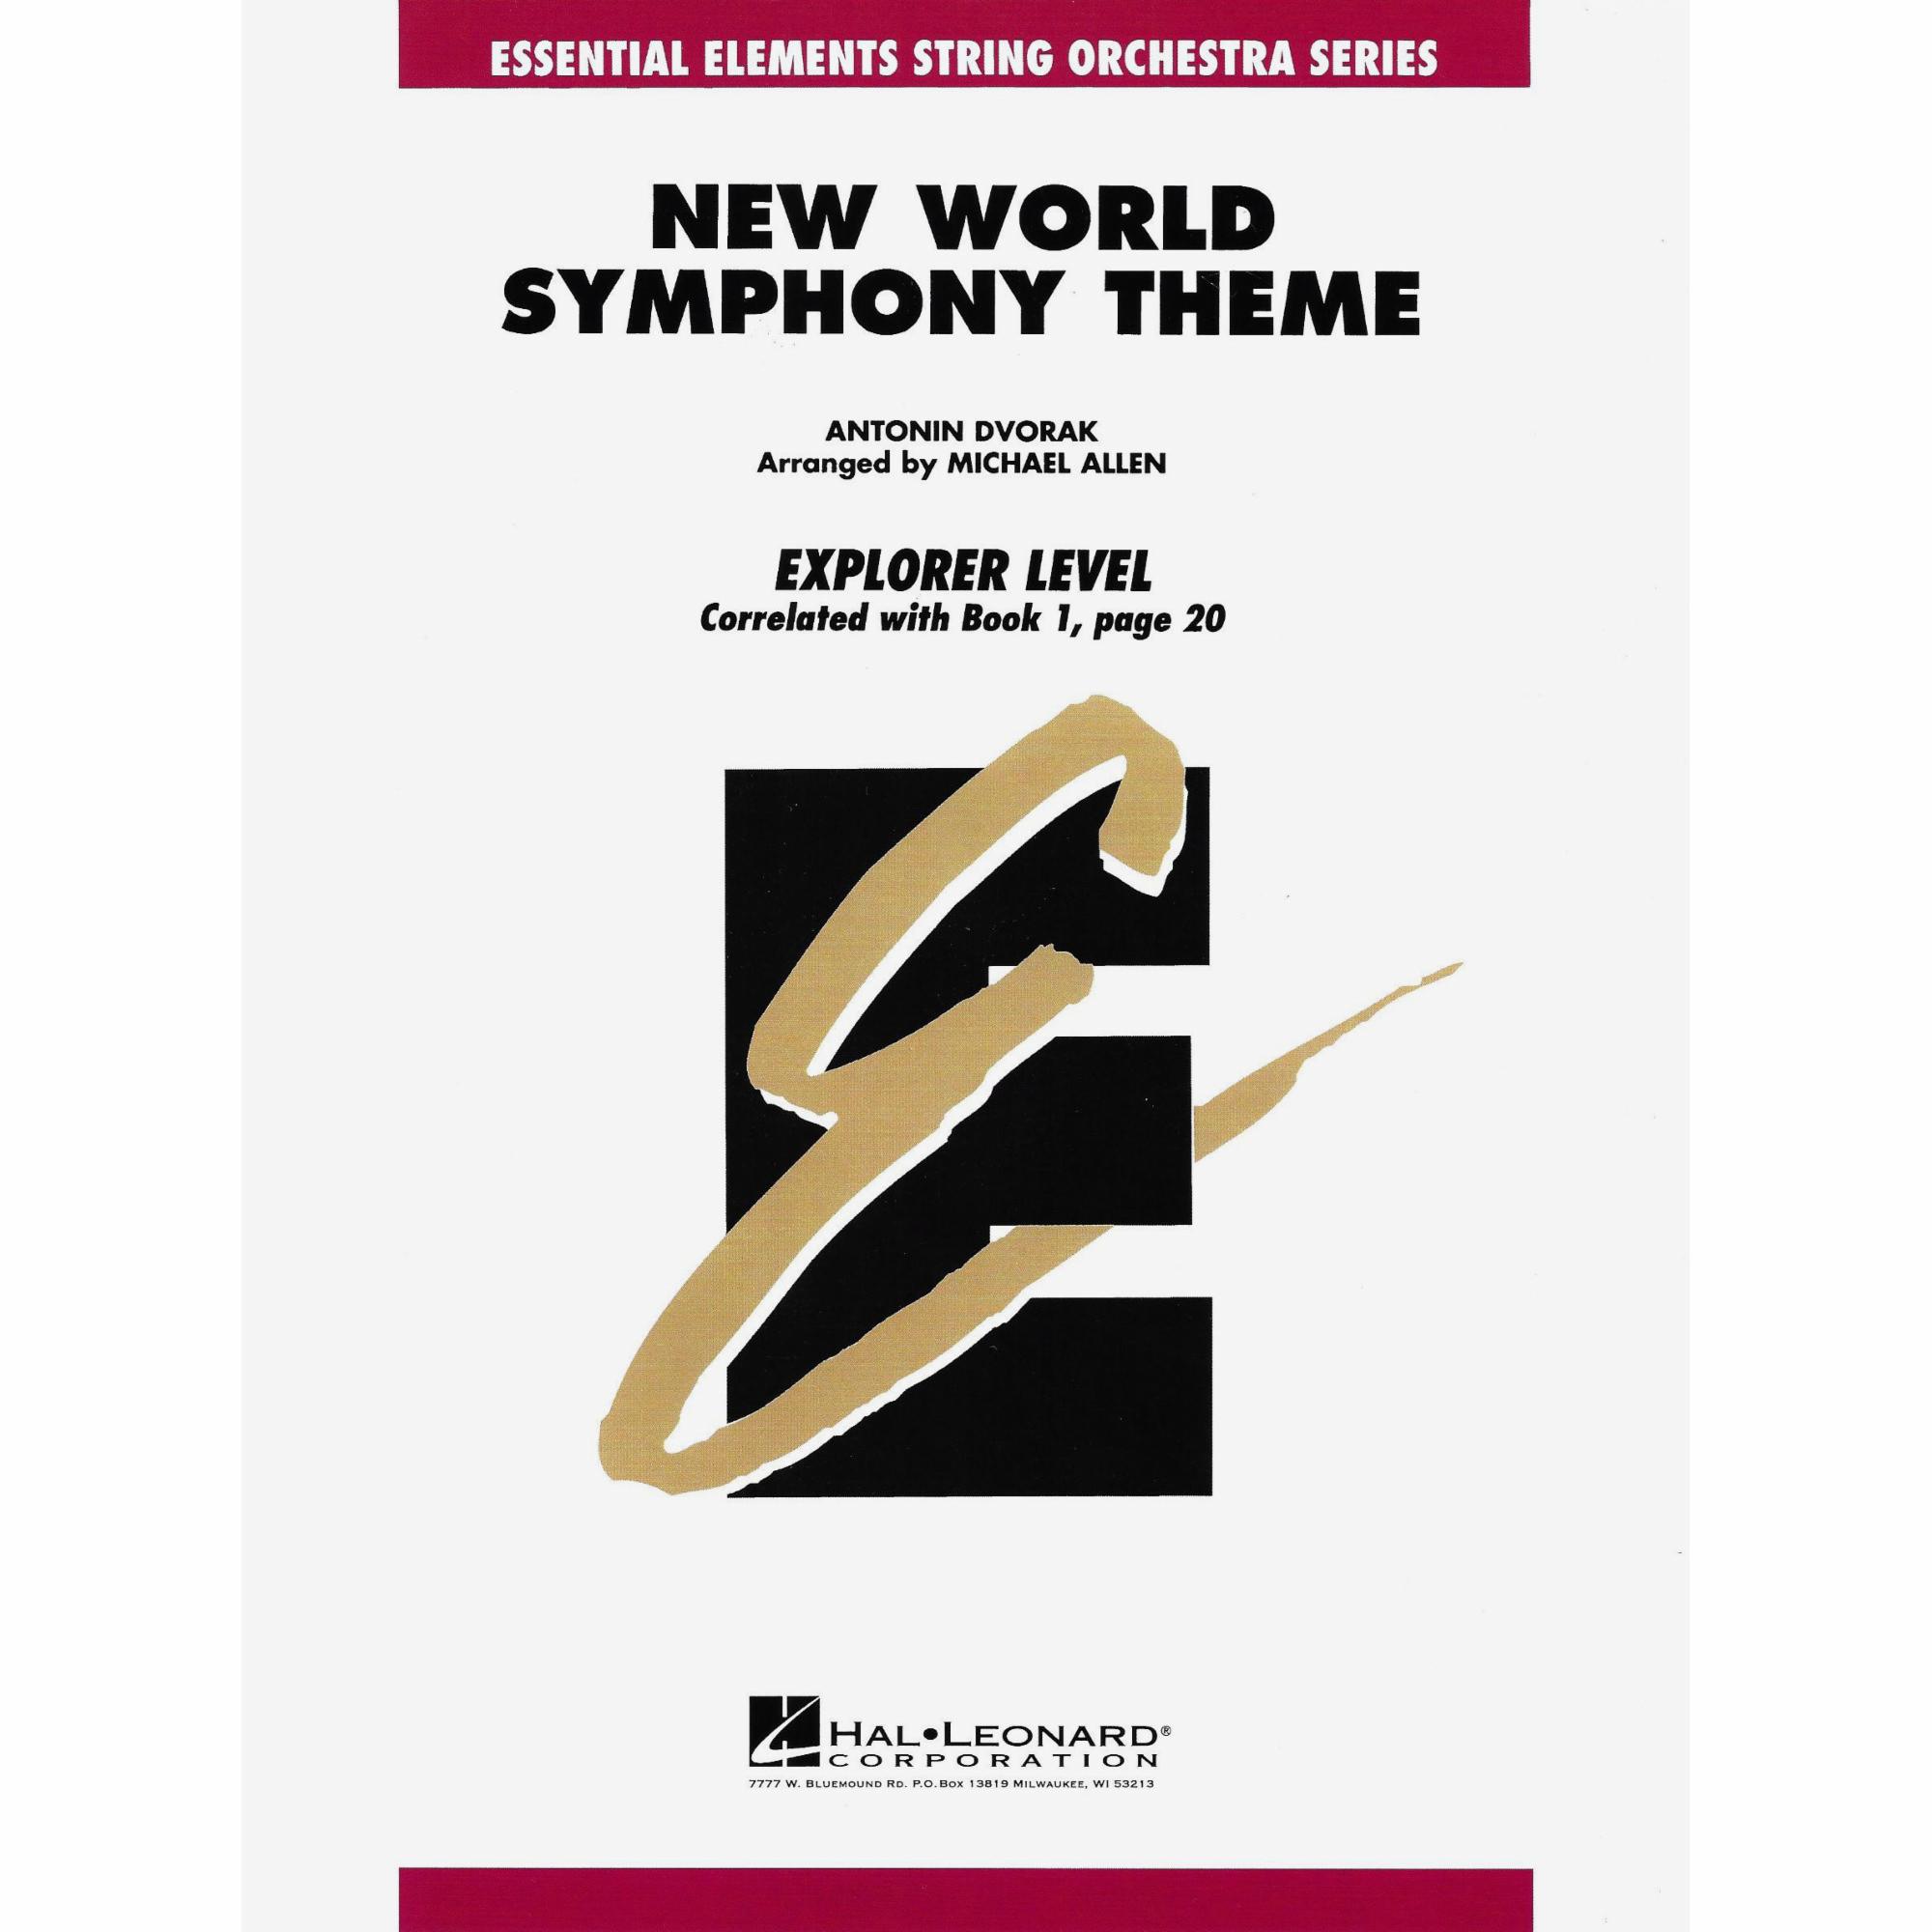 New World Symphony Theme for String Orchestra